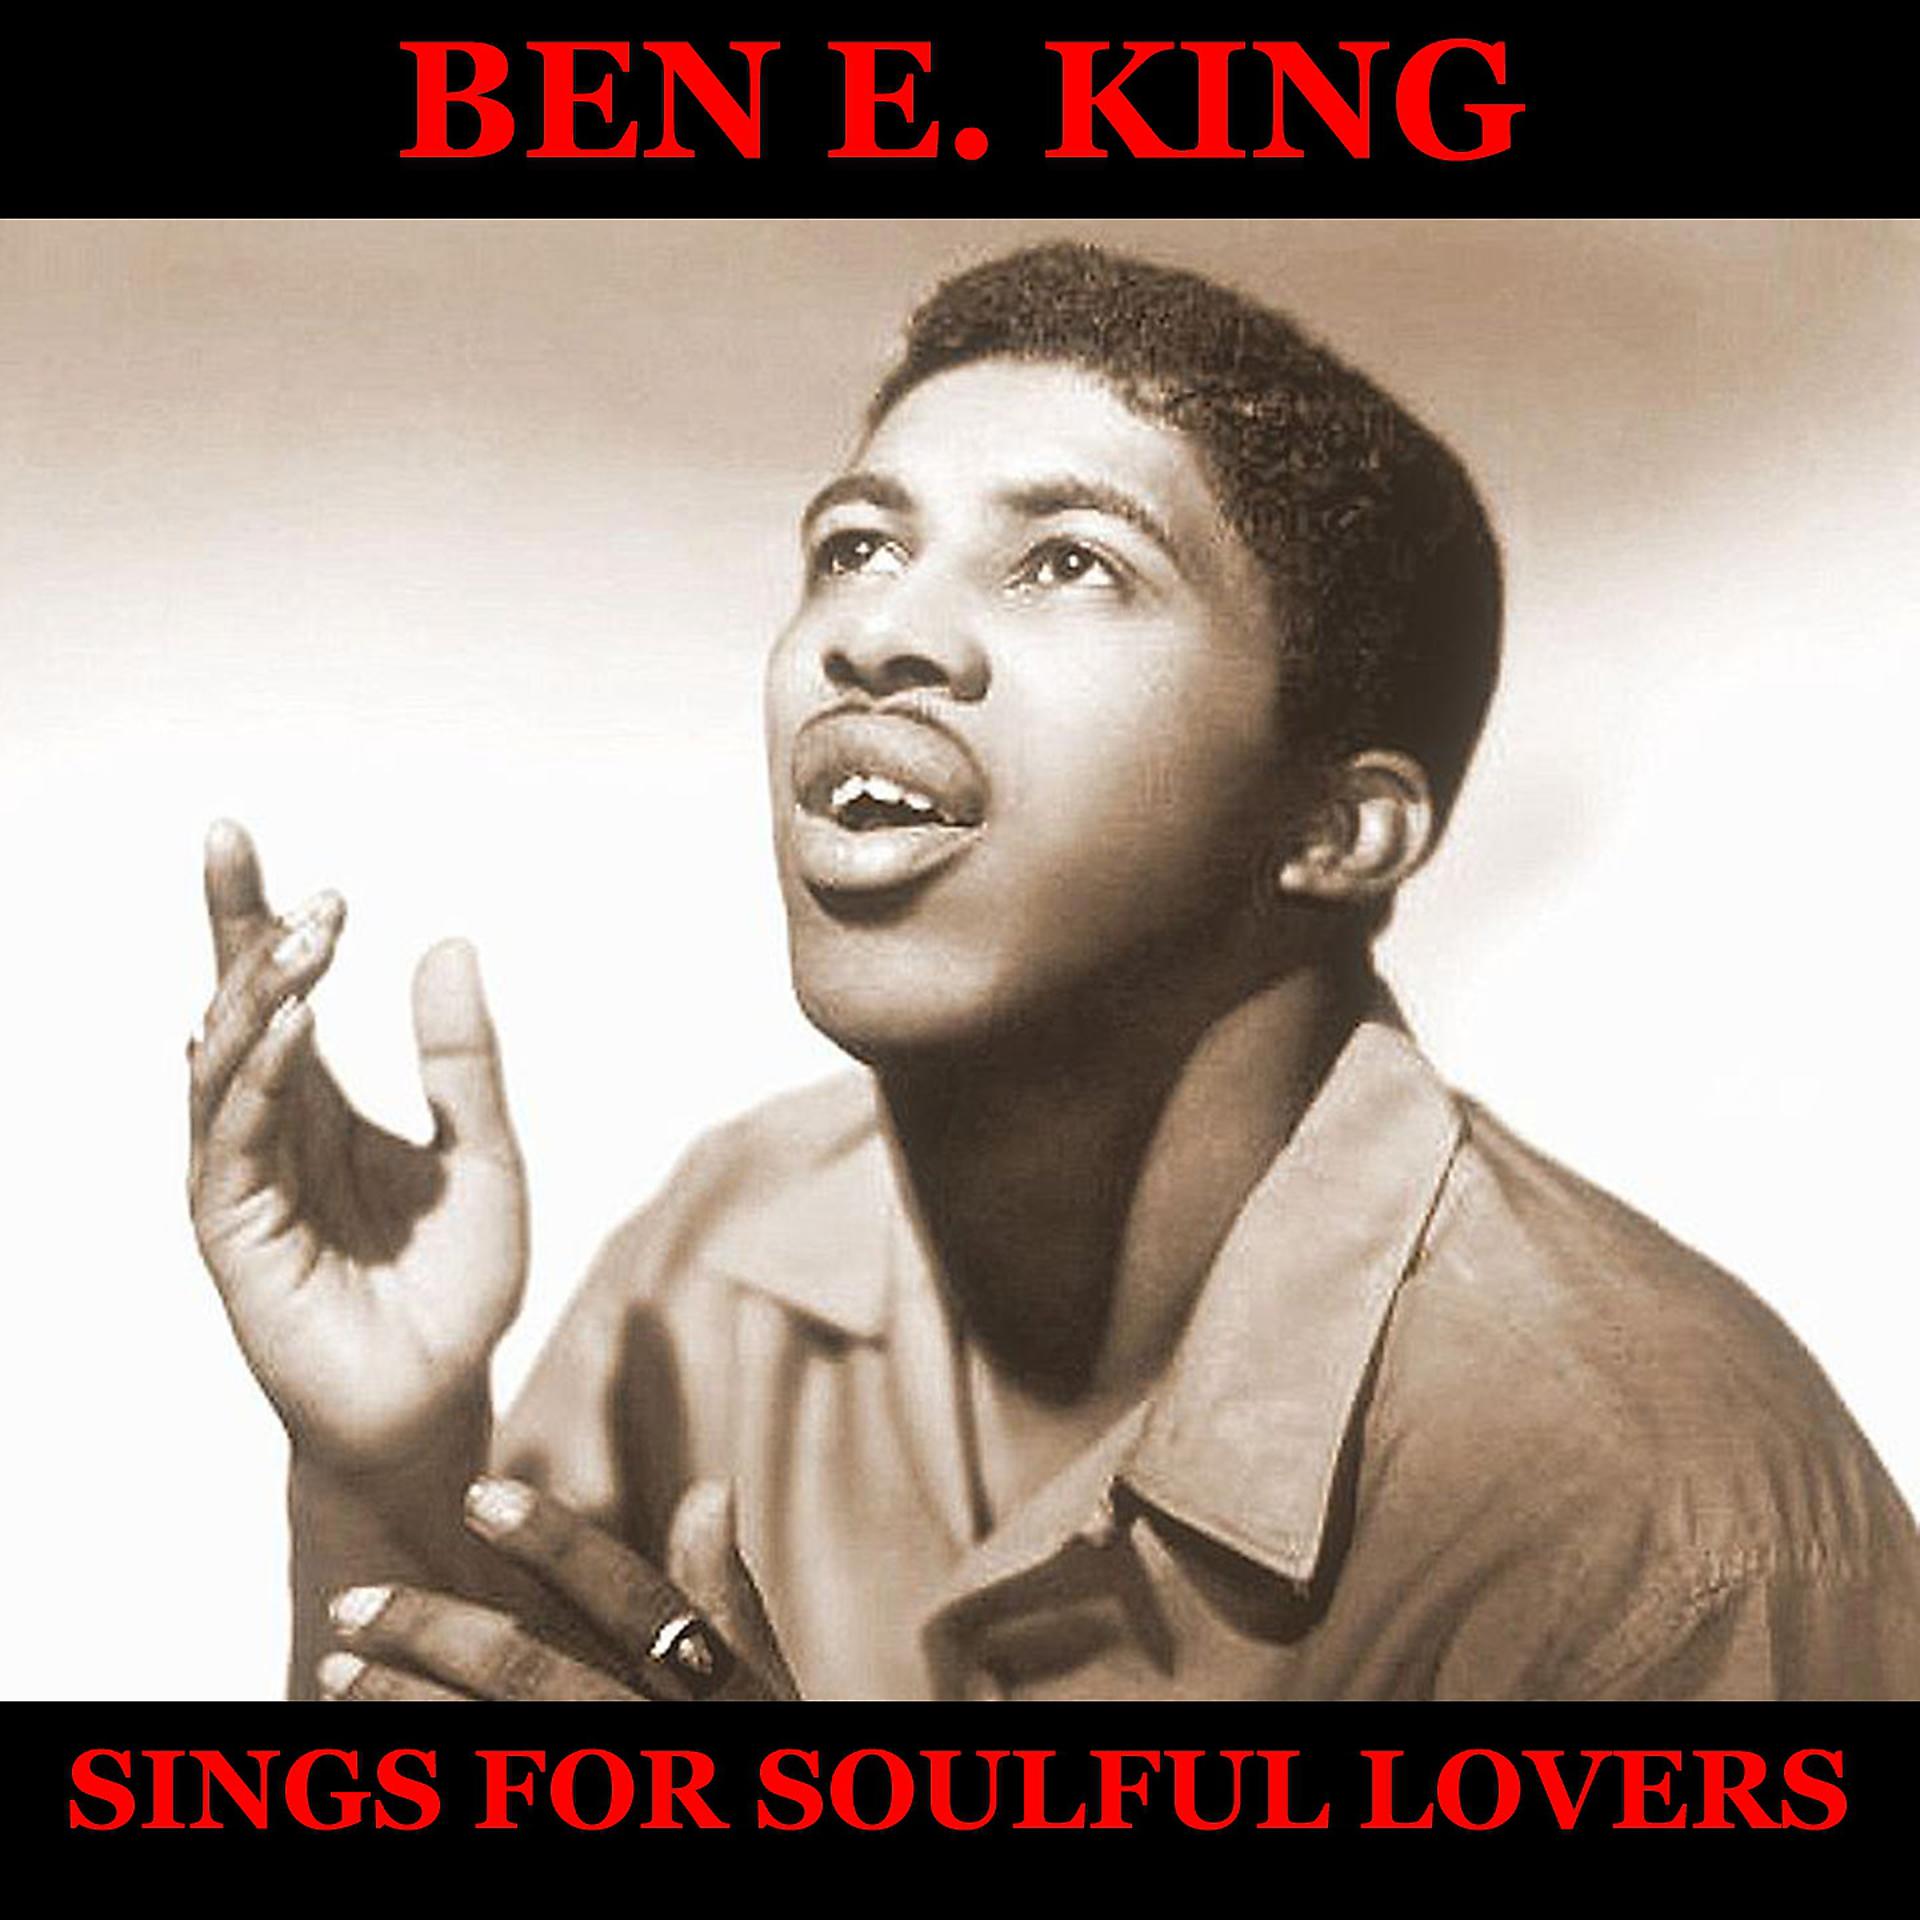 Постер альбома Ben E. King Sings for Soulful Lovers - Full Album: My Heart Cries For You / He Will Break Your Heart / Dream Lover / Will You Love Me Tomorrow / My Foolish Heart / Fever / Moon River / What A Difference A Day Made / Because Of You / At Last / On The Stree